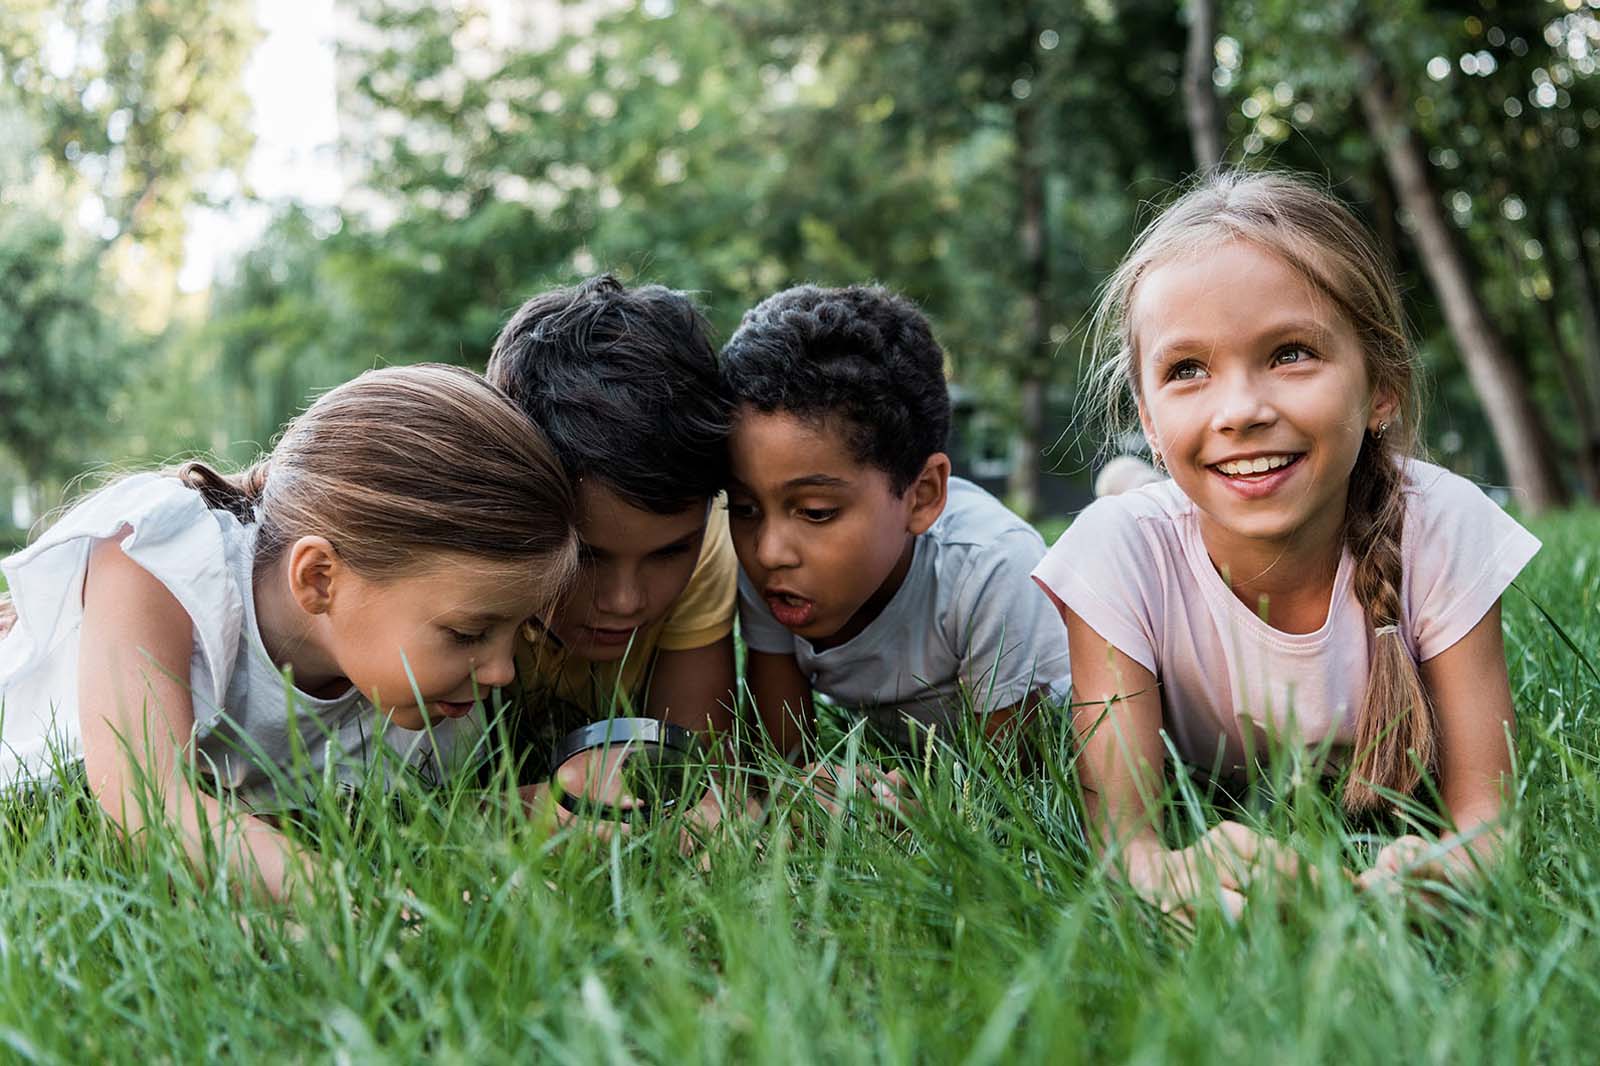 Group Of Kids Exploring In The Grass